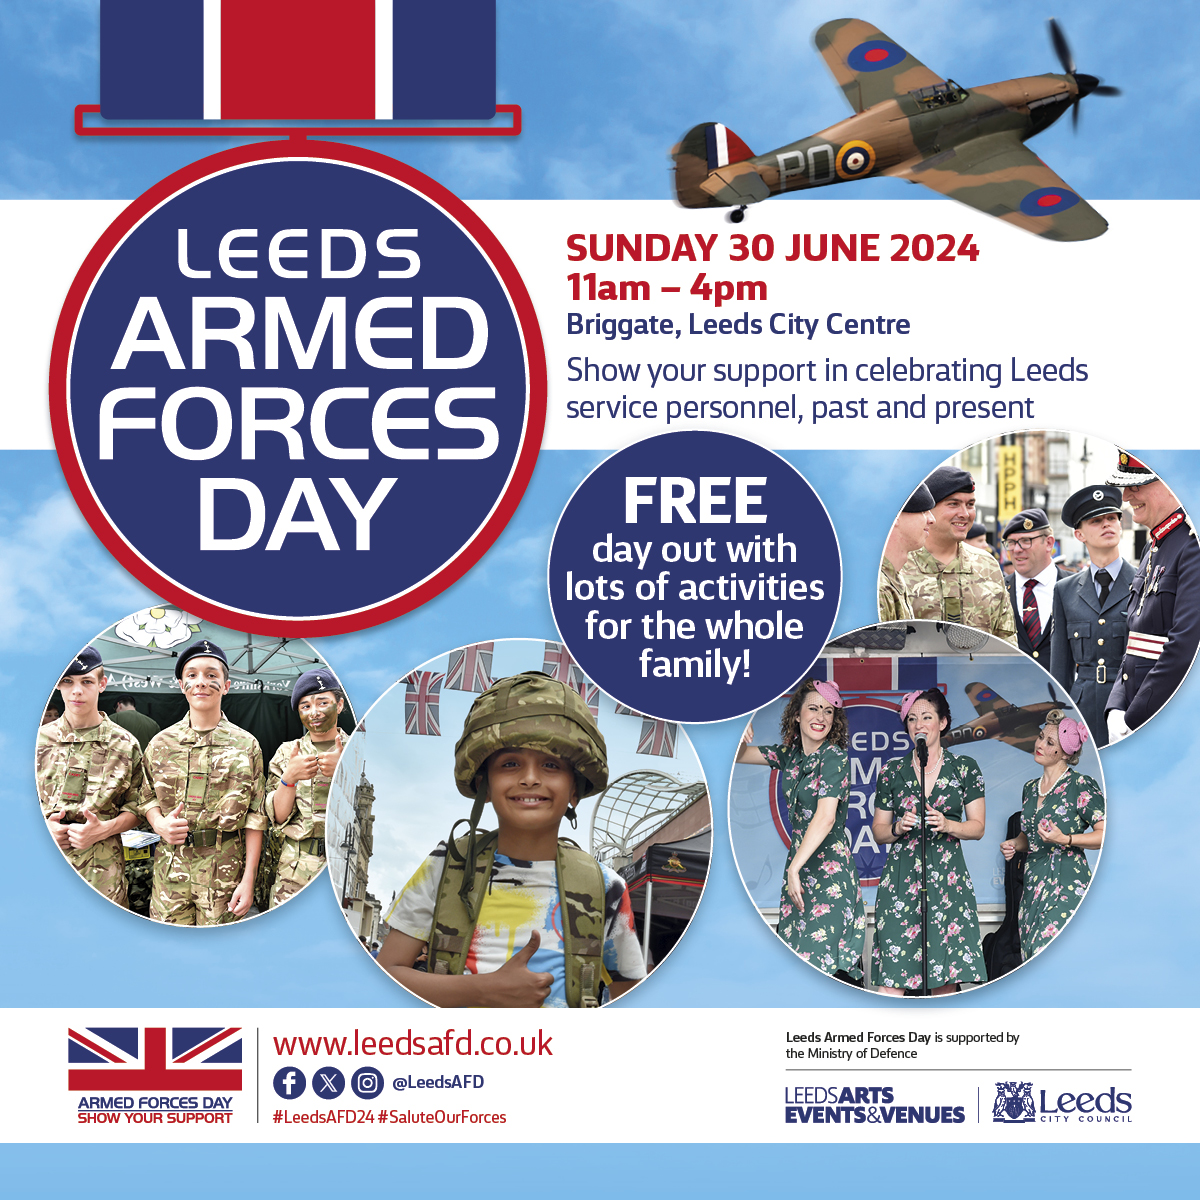 #LeedsArmedForcesDay 30 June 11am - 4pm, hosted by the Lord Mayor of Leeds, with a parade, stalls, exhibitions, & family activities. #LeedsAFD24 #SaluteOurForces @BritishArmy @RoyalNavy @RoyalAirForce @ArmedForcesDay @millsqleeds @carriageworks_ @BBCLeeds bit.ly/44wZnUp